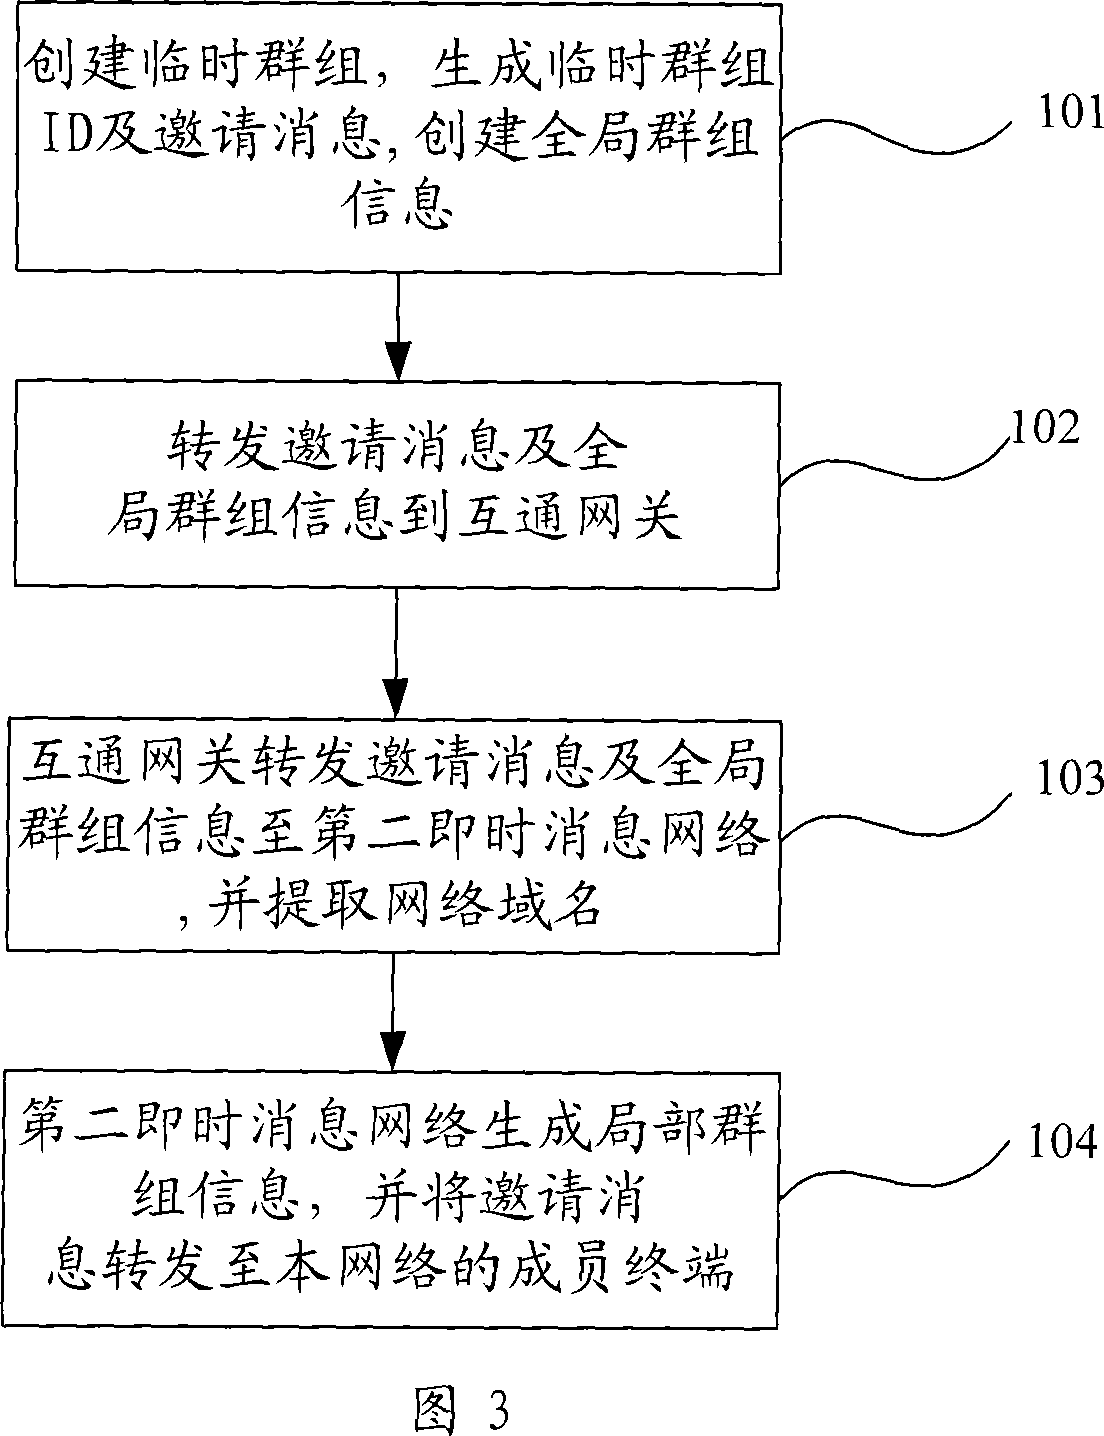 Information update method for member addition and exit in the temporary group of the instant message